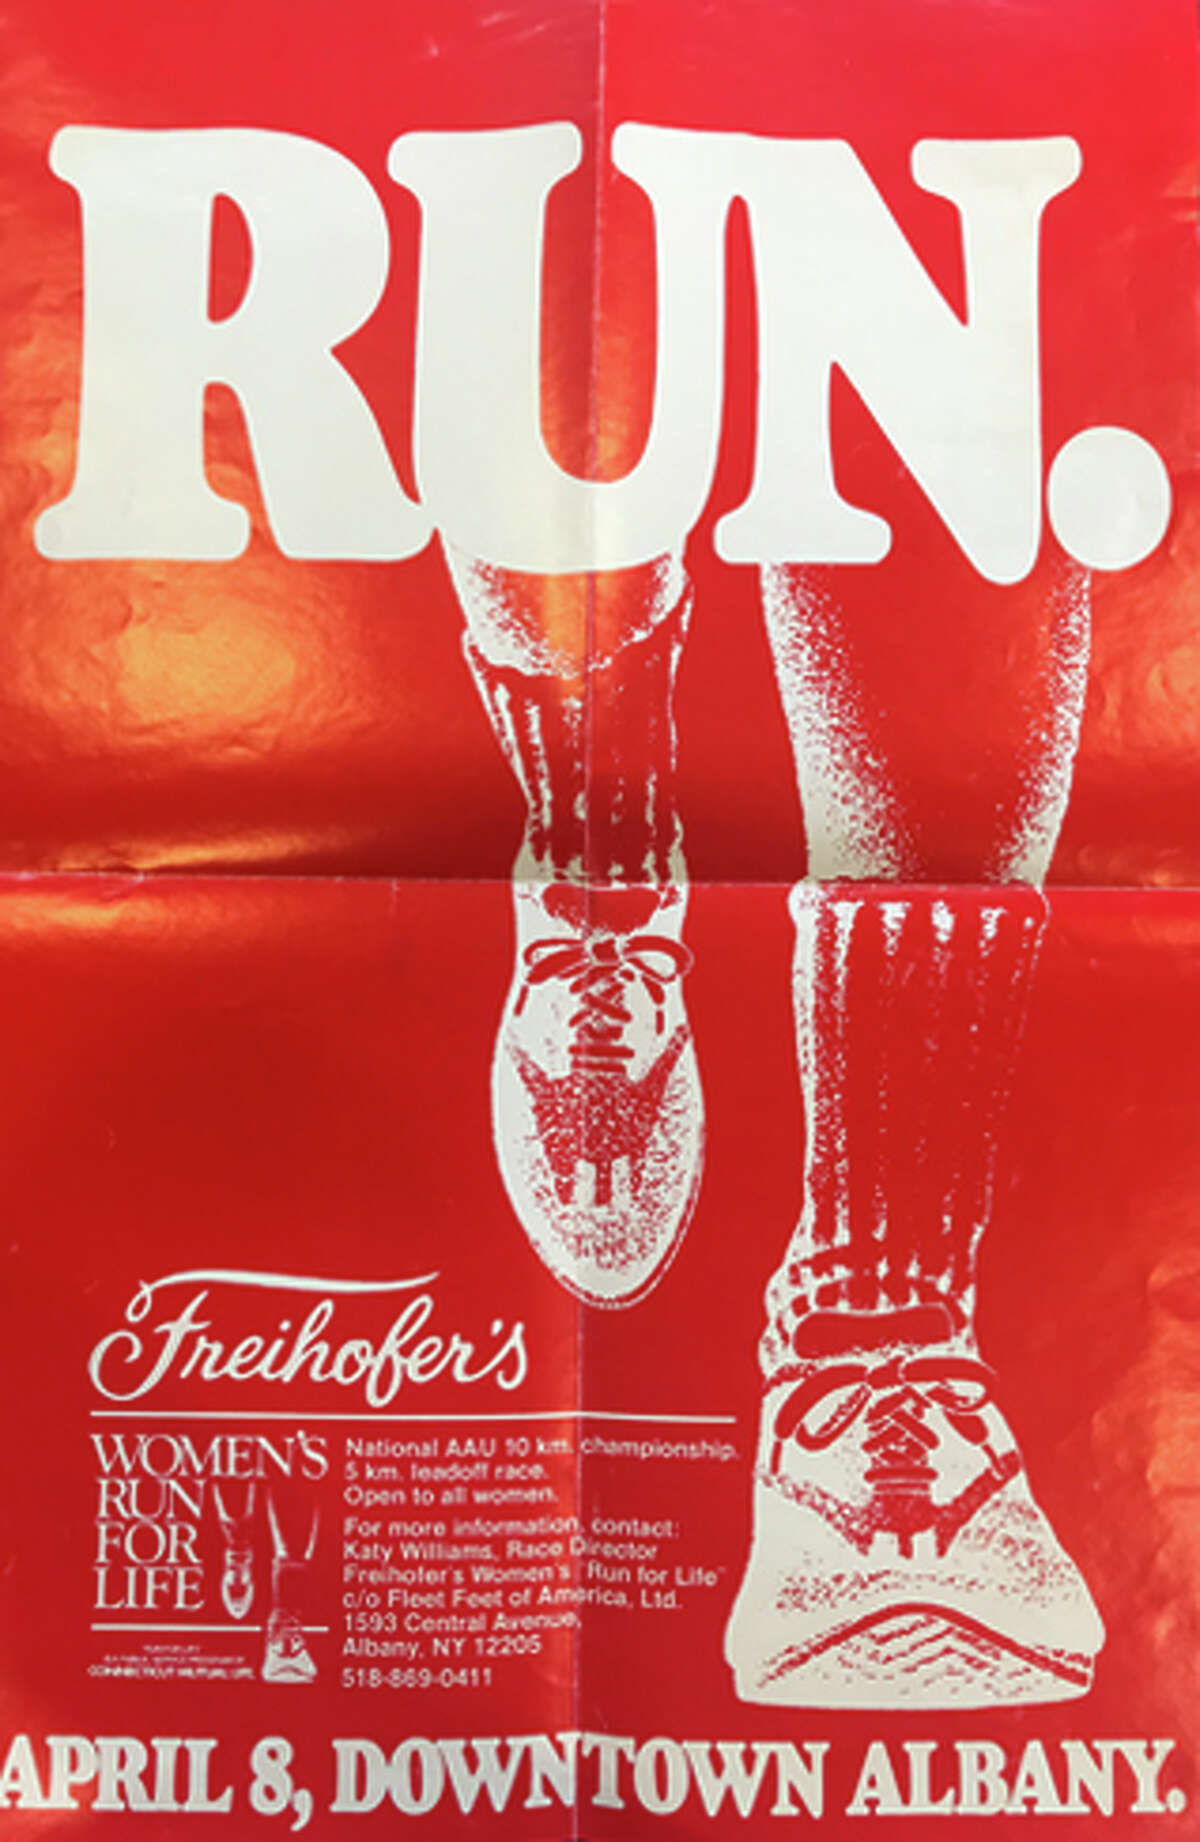 Click through the photos for a timeline of major milestones in the history of the Freihofer's Run for women. 1979: For the first two years of its existence, the Freihofer's Run for Woman was referred to as the "Freihofer's Run for Life." Its first edition was held on April 8 where it hosted the country's first Women’s 10K (AAU) National Road Race Championship, a designation retained through 1988. The 1979 race drew 503 registrants, 260 of whom participated in a Leadoff 5K. The winner of the 10K AAU National Championship was Karin Von Berg, Ithaca, N.Y. (34:26) and Nina Kuscik, a pioneer in women's road running, crossed the line first in the masters (40+) division of the 10K in 37:42. The 5K winner was Martha Swatt, Johnstown, N.Y.